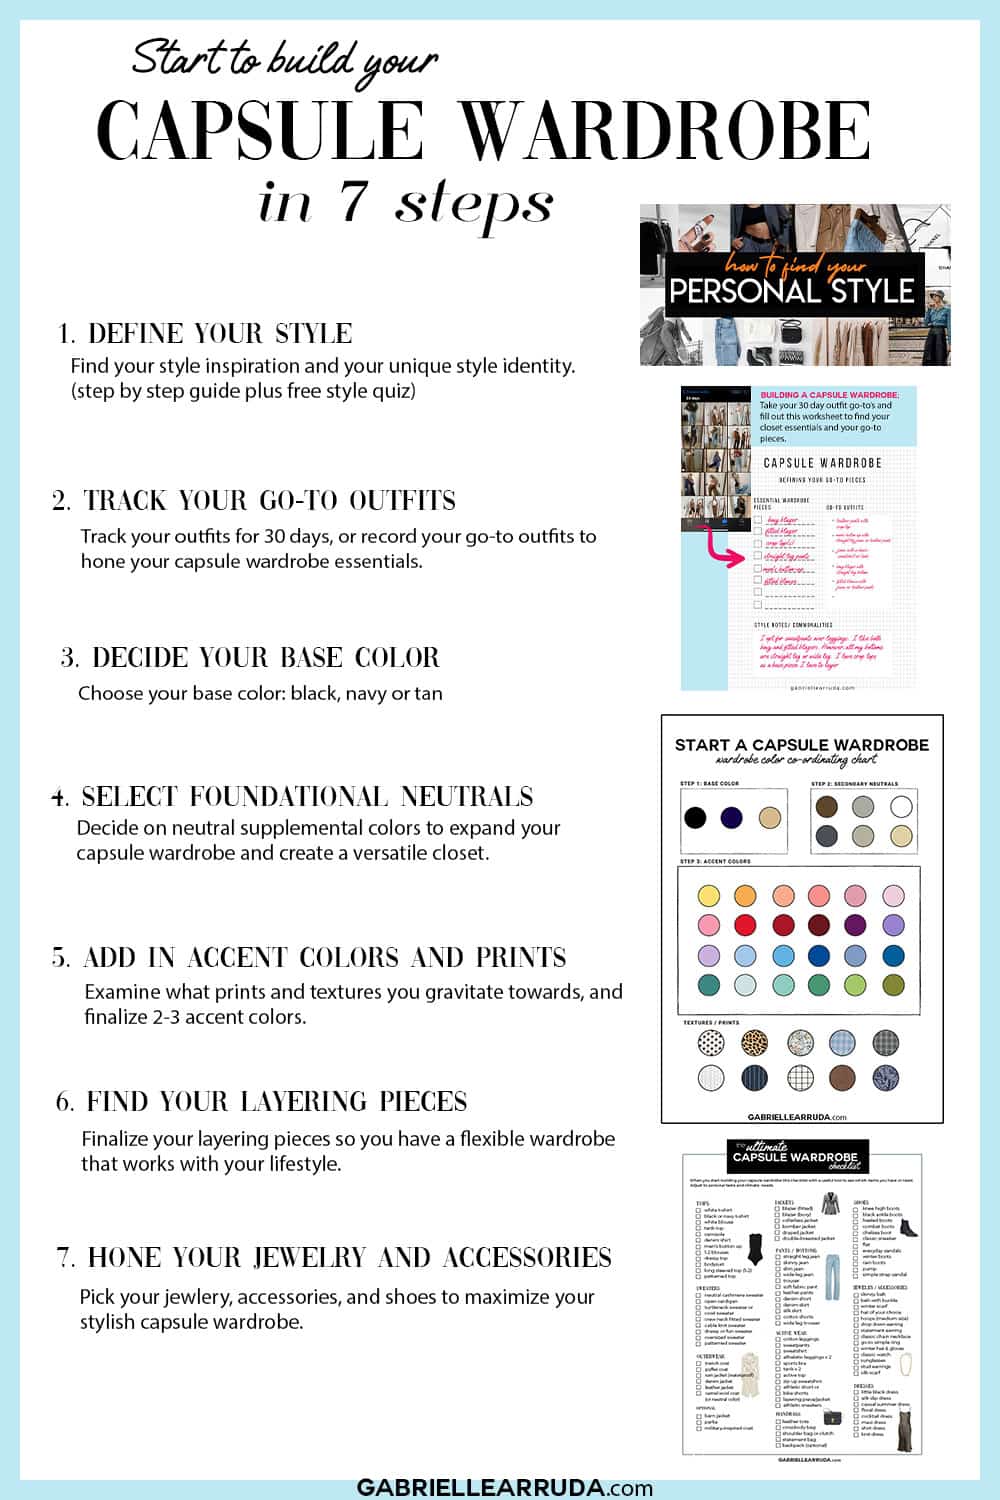 how to start a capsule wardrobe in 7 steps. 1. define your style 2. track your go-to outfits 3. decide your base color 4. select foundational neutrals 5. add in accent colors and prints 6. find your layering pieces 7. hone your jewelry and accessories